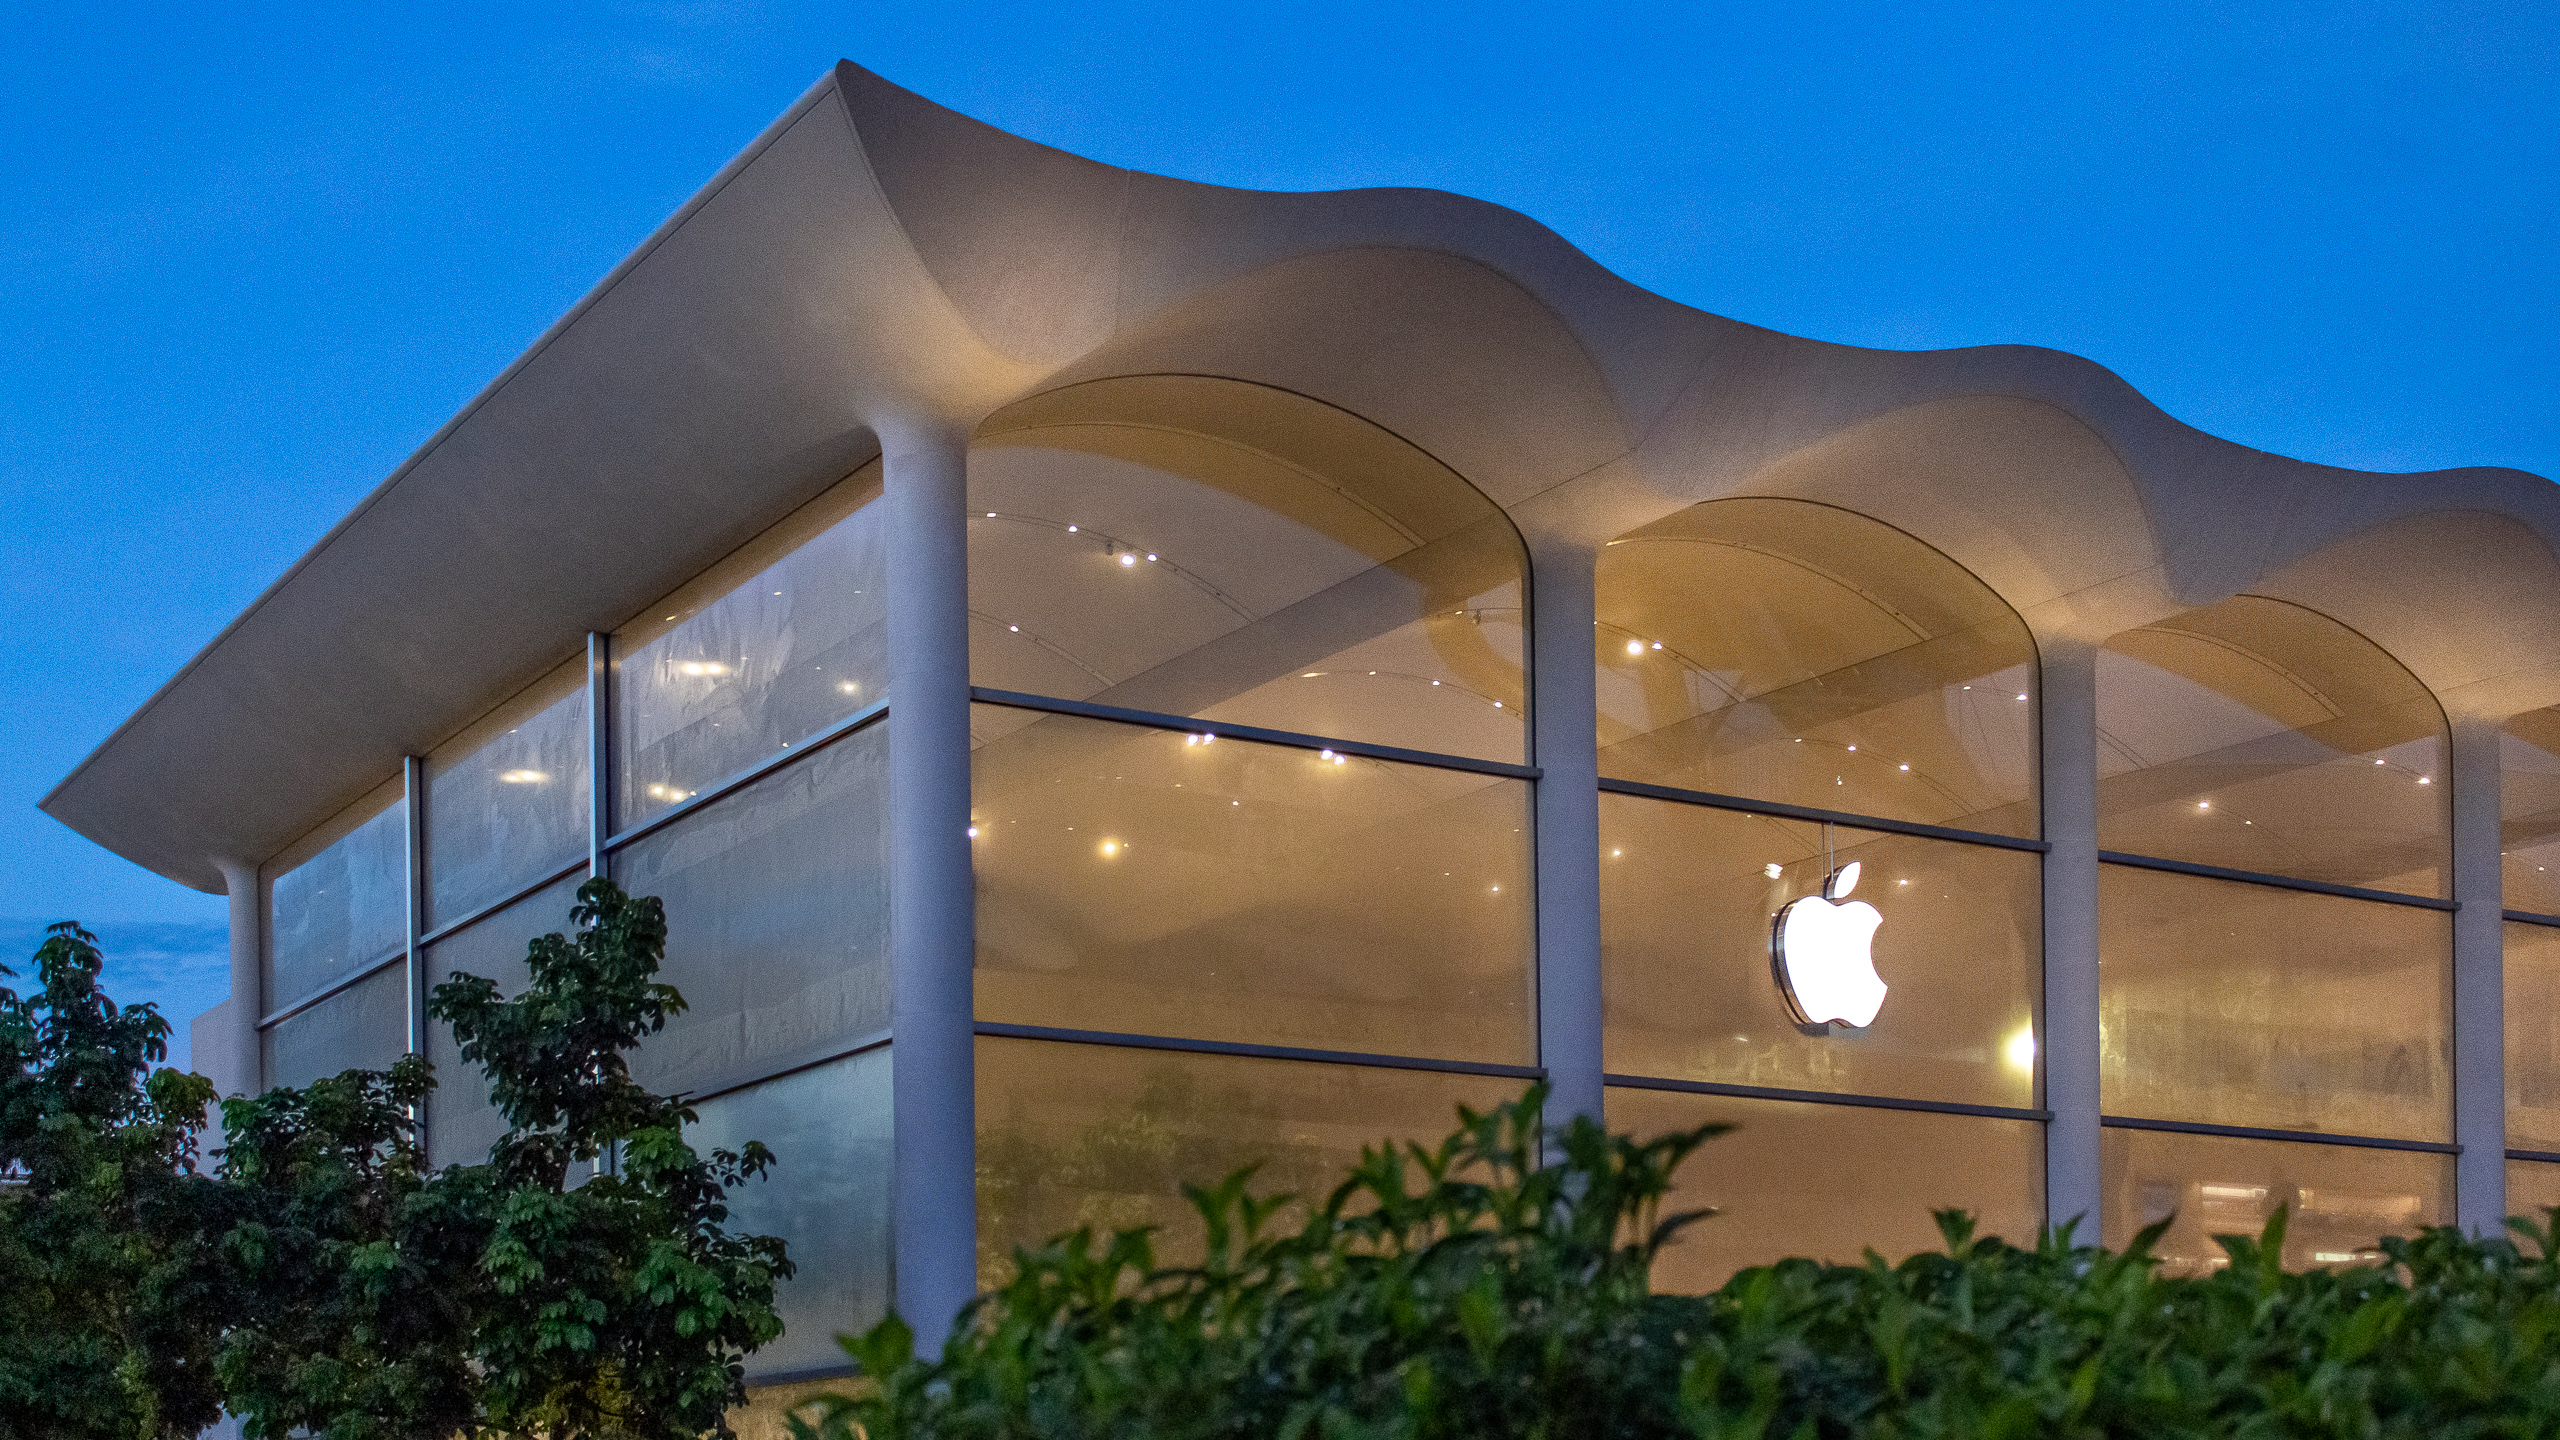 World's largest Apple Store to reportedly open in Miami